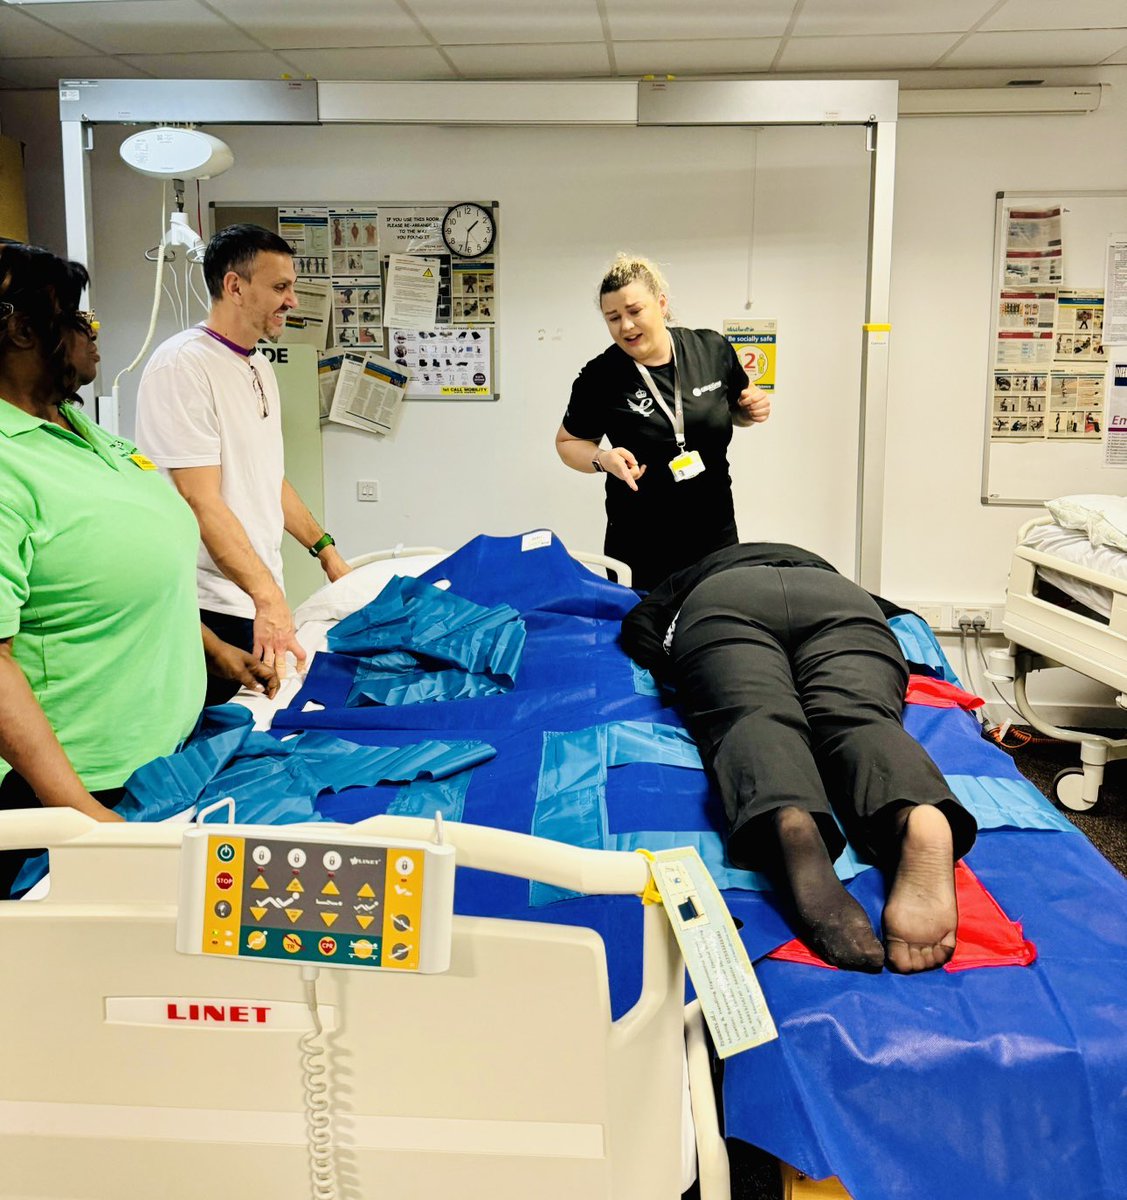 Thank you #GBUKGroup 4 the collaborative & fantastic training session with @NHSBartsHealth @Moving_Handling on this #ProningDevice. It’s incredible how it aids clinicians in safely positioning patients 4 surgery & post-op care.#PatientSafety #MedicalInnovation #HealthcareTraining